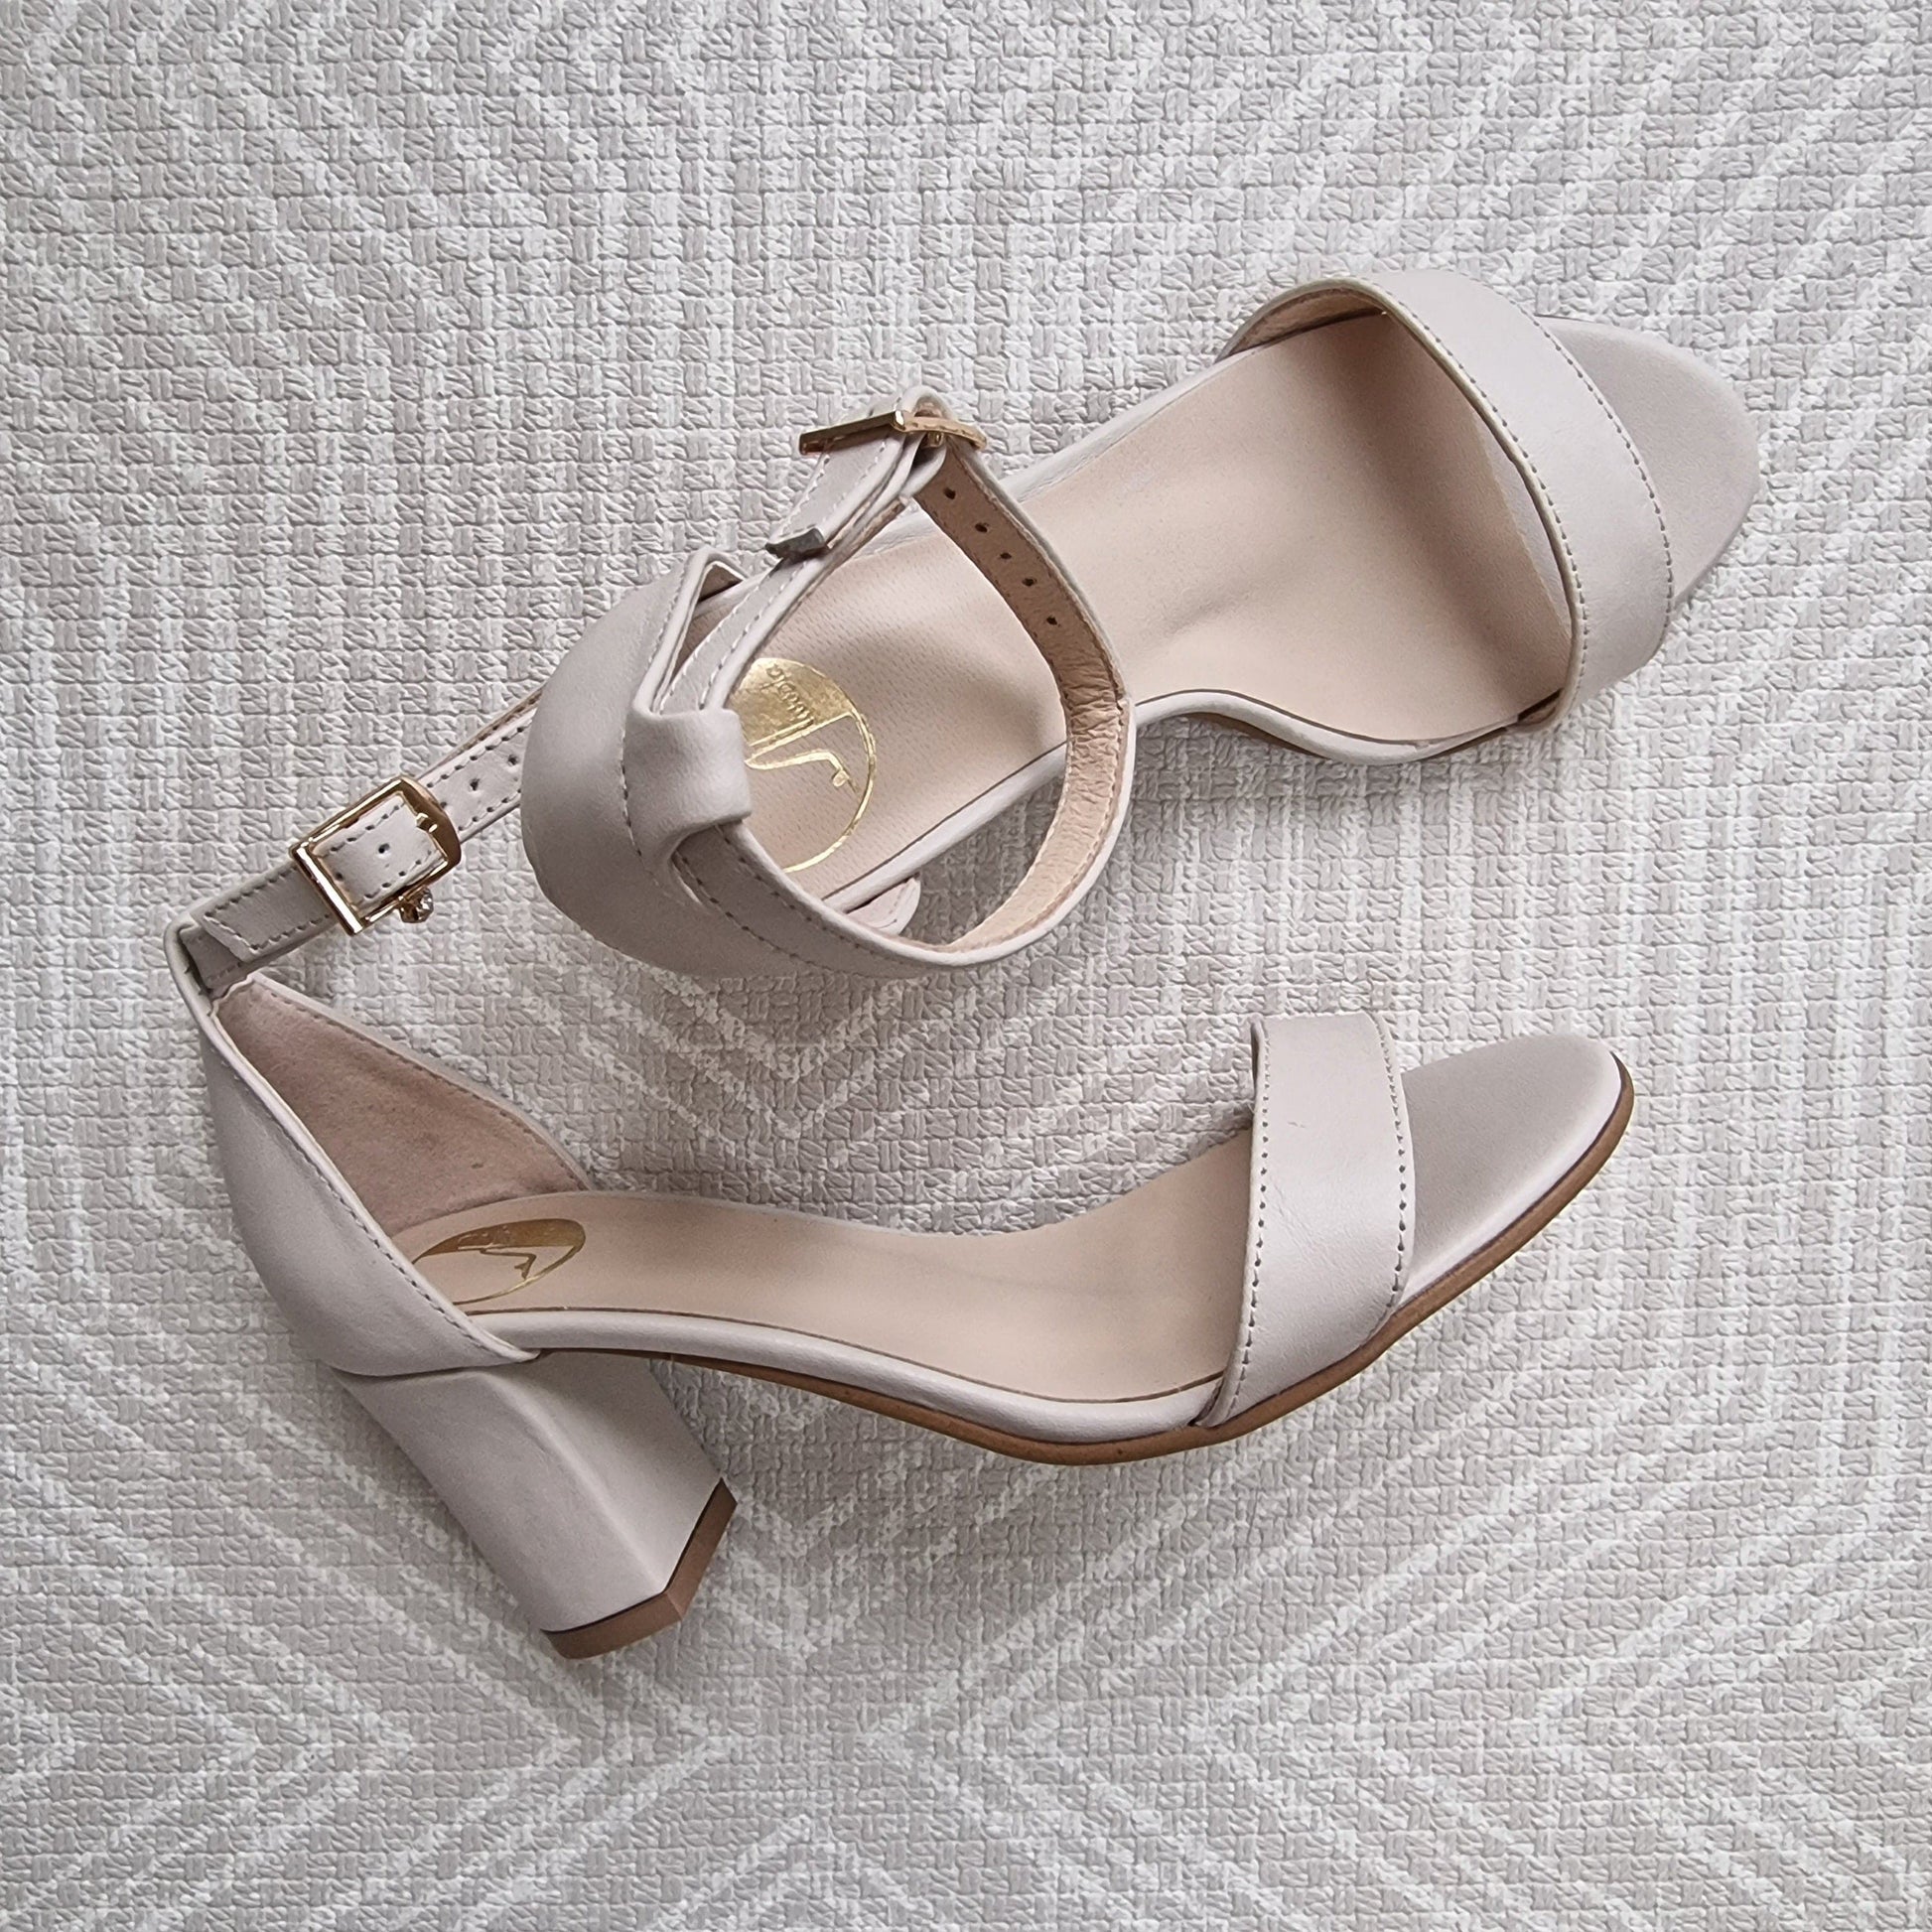 Nude leather ankle strap sandals set on a block heel